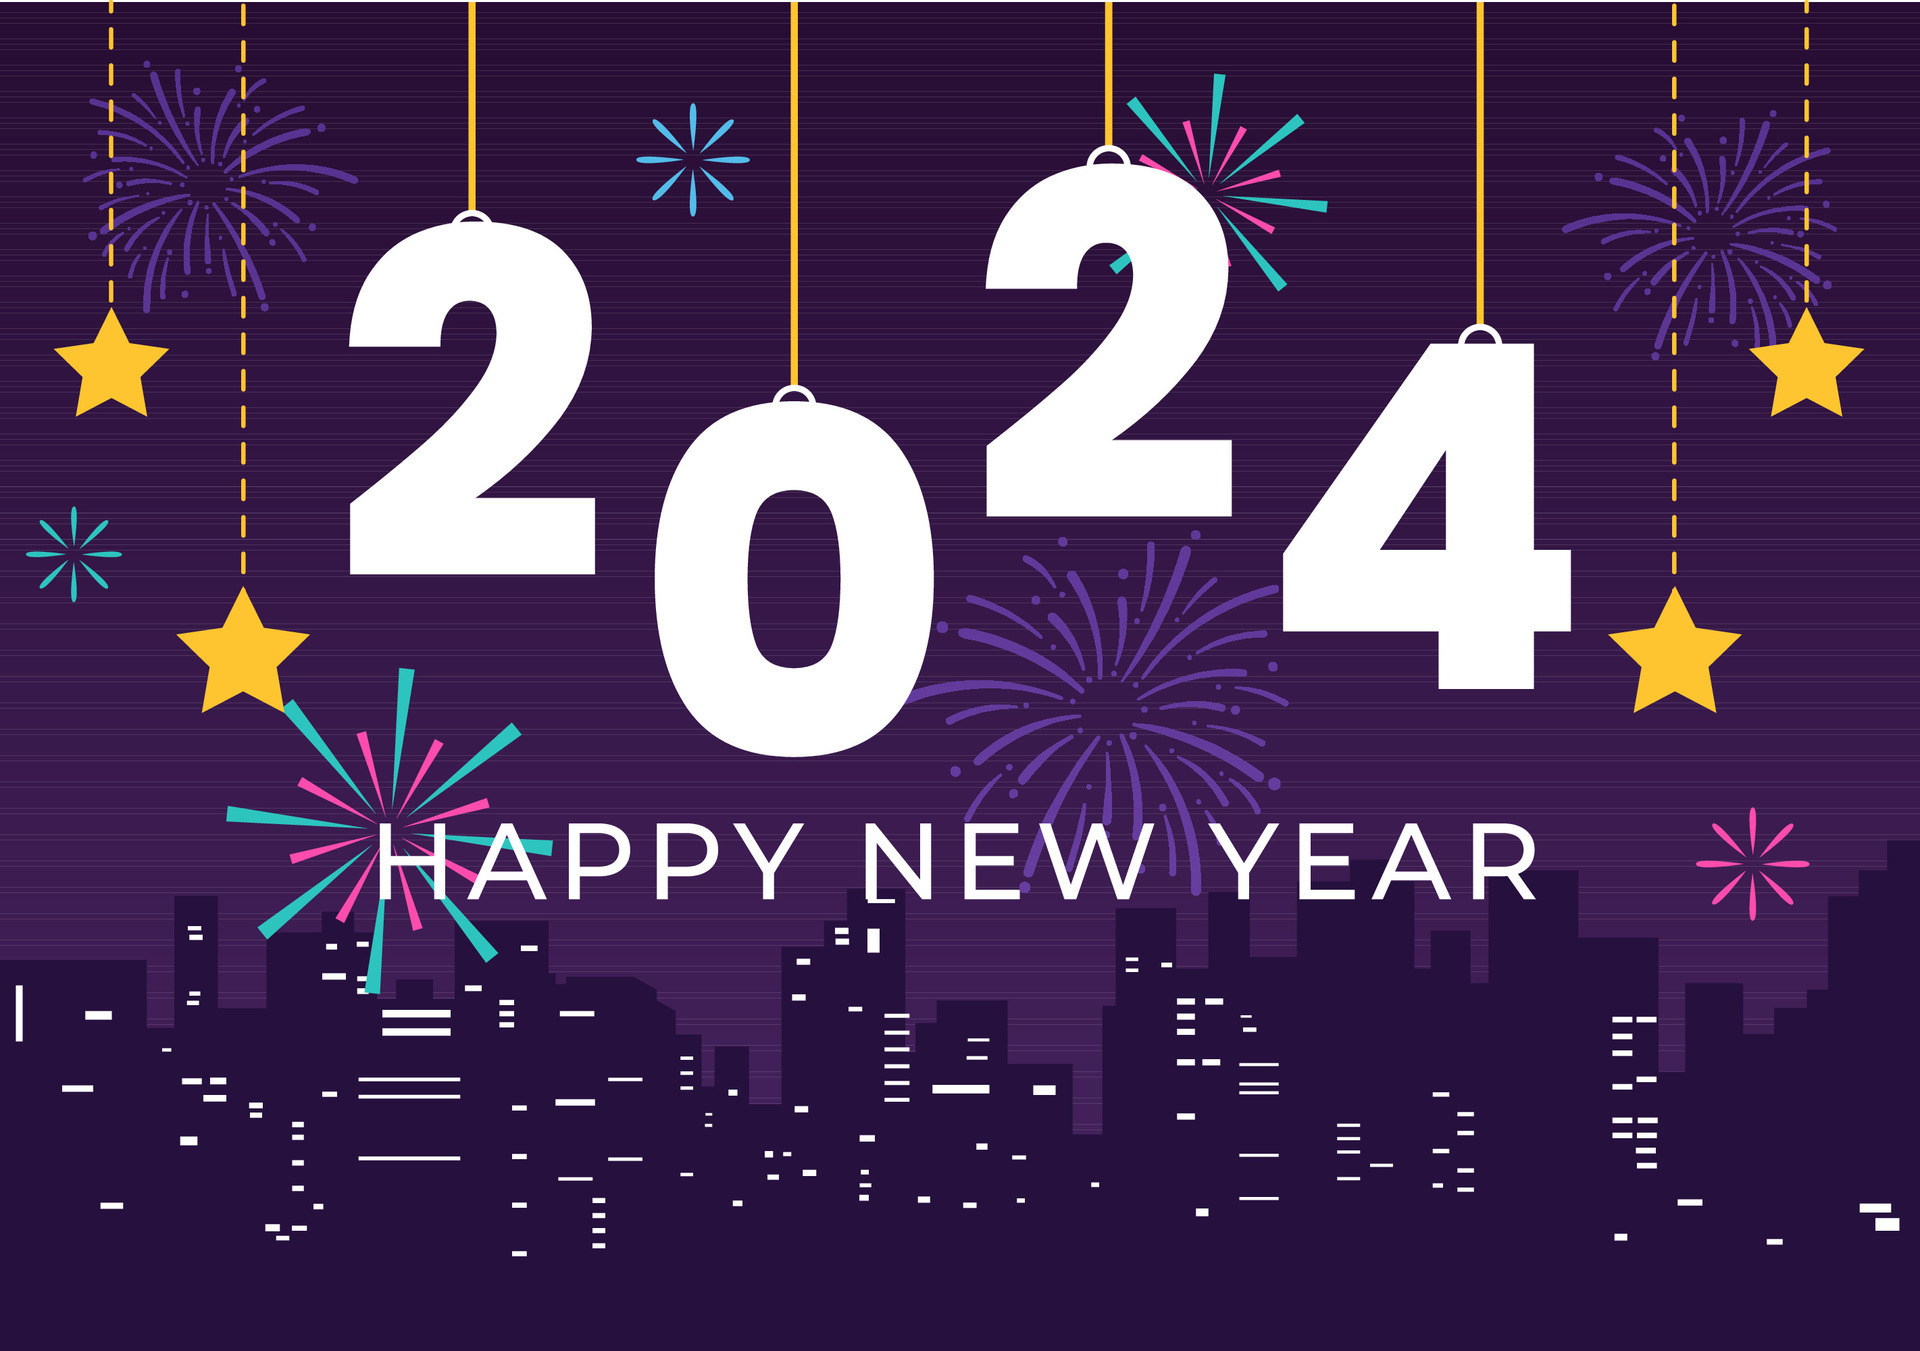 Happy New Year 2024 Celebration Vector Illustration with Trumpet ...